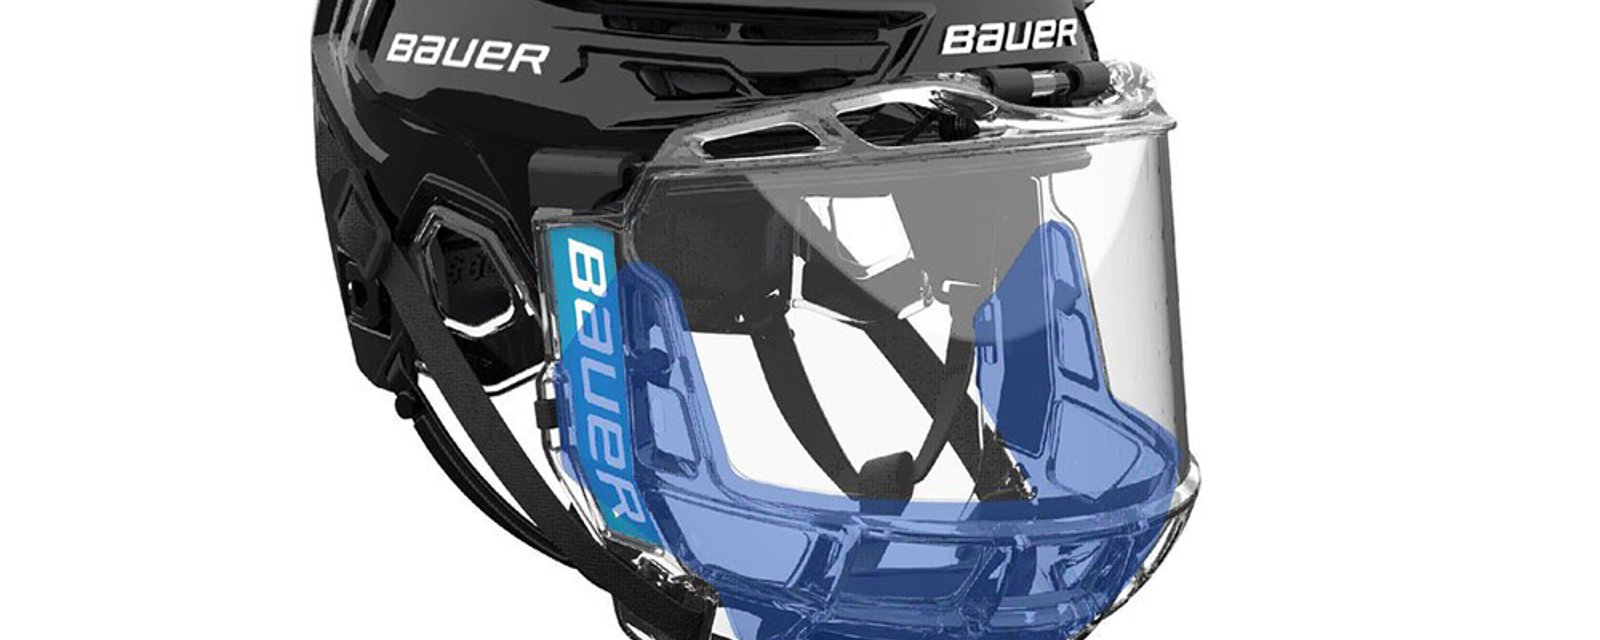 Bauer releases design of new helmets with full face-guard protection